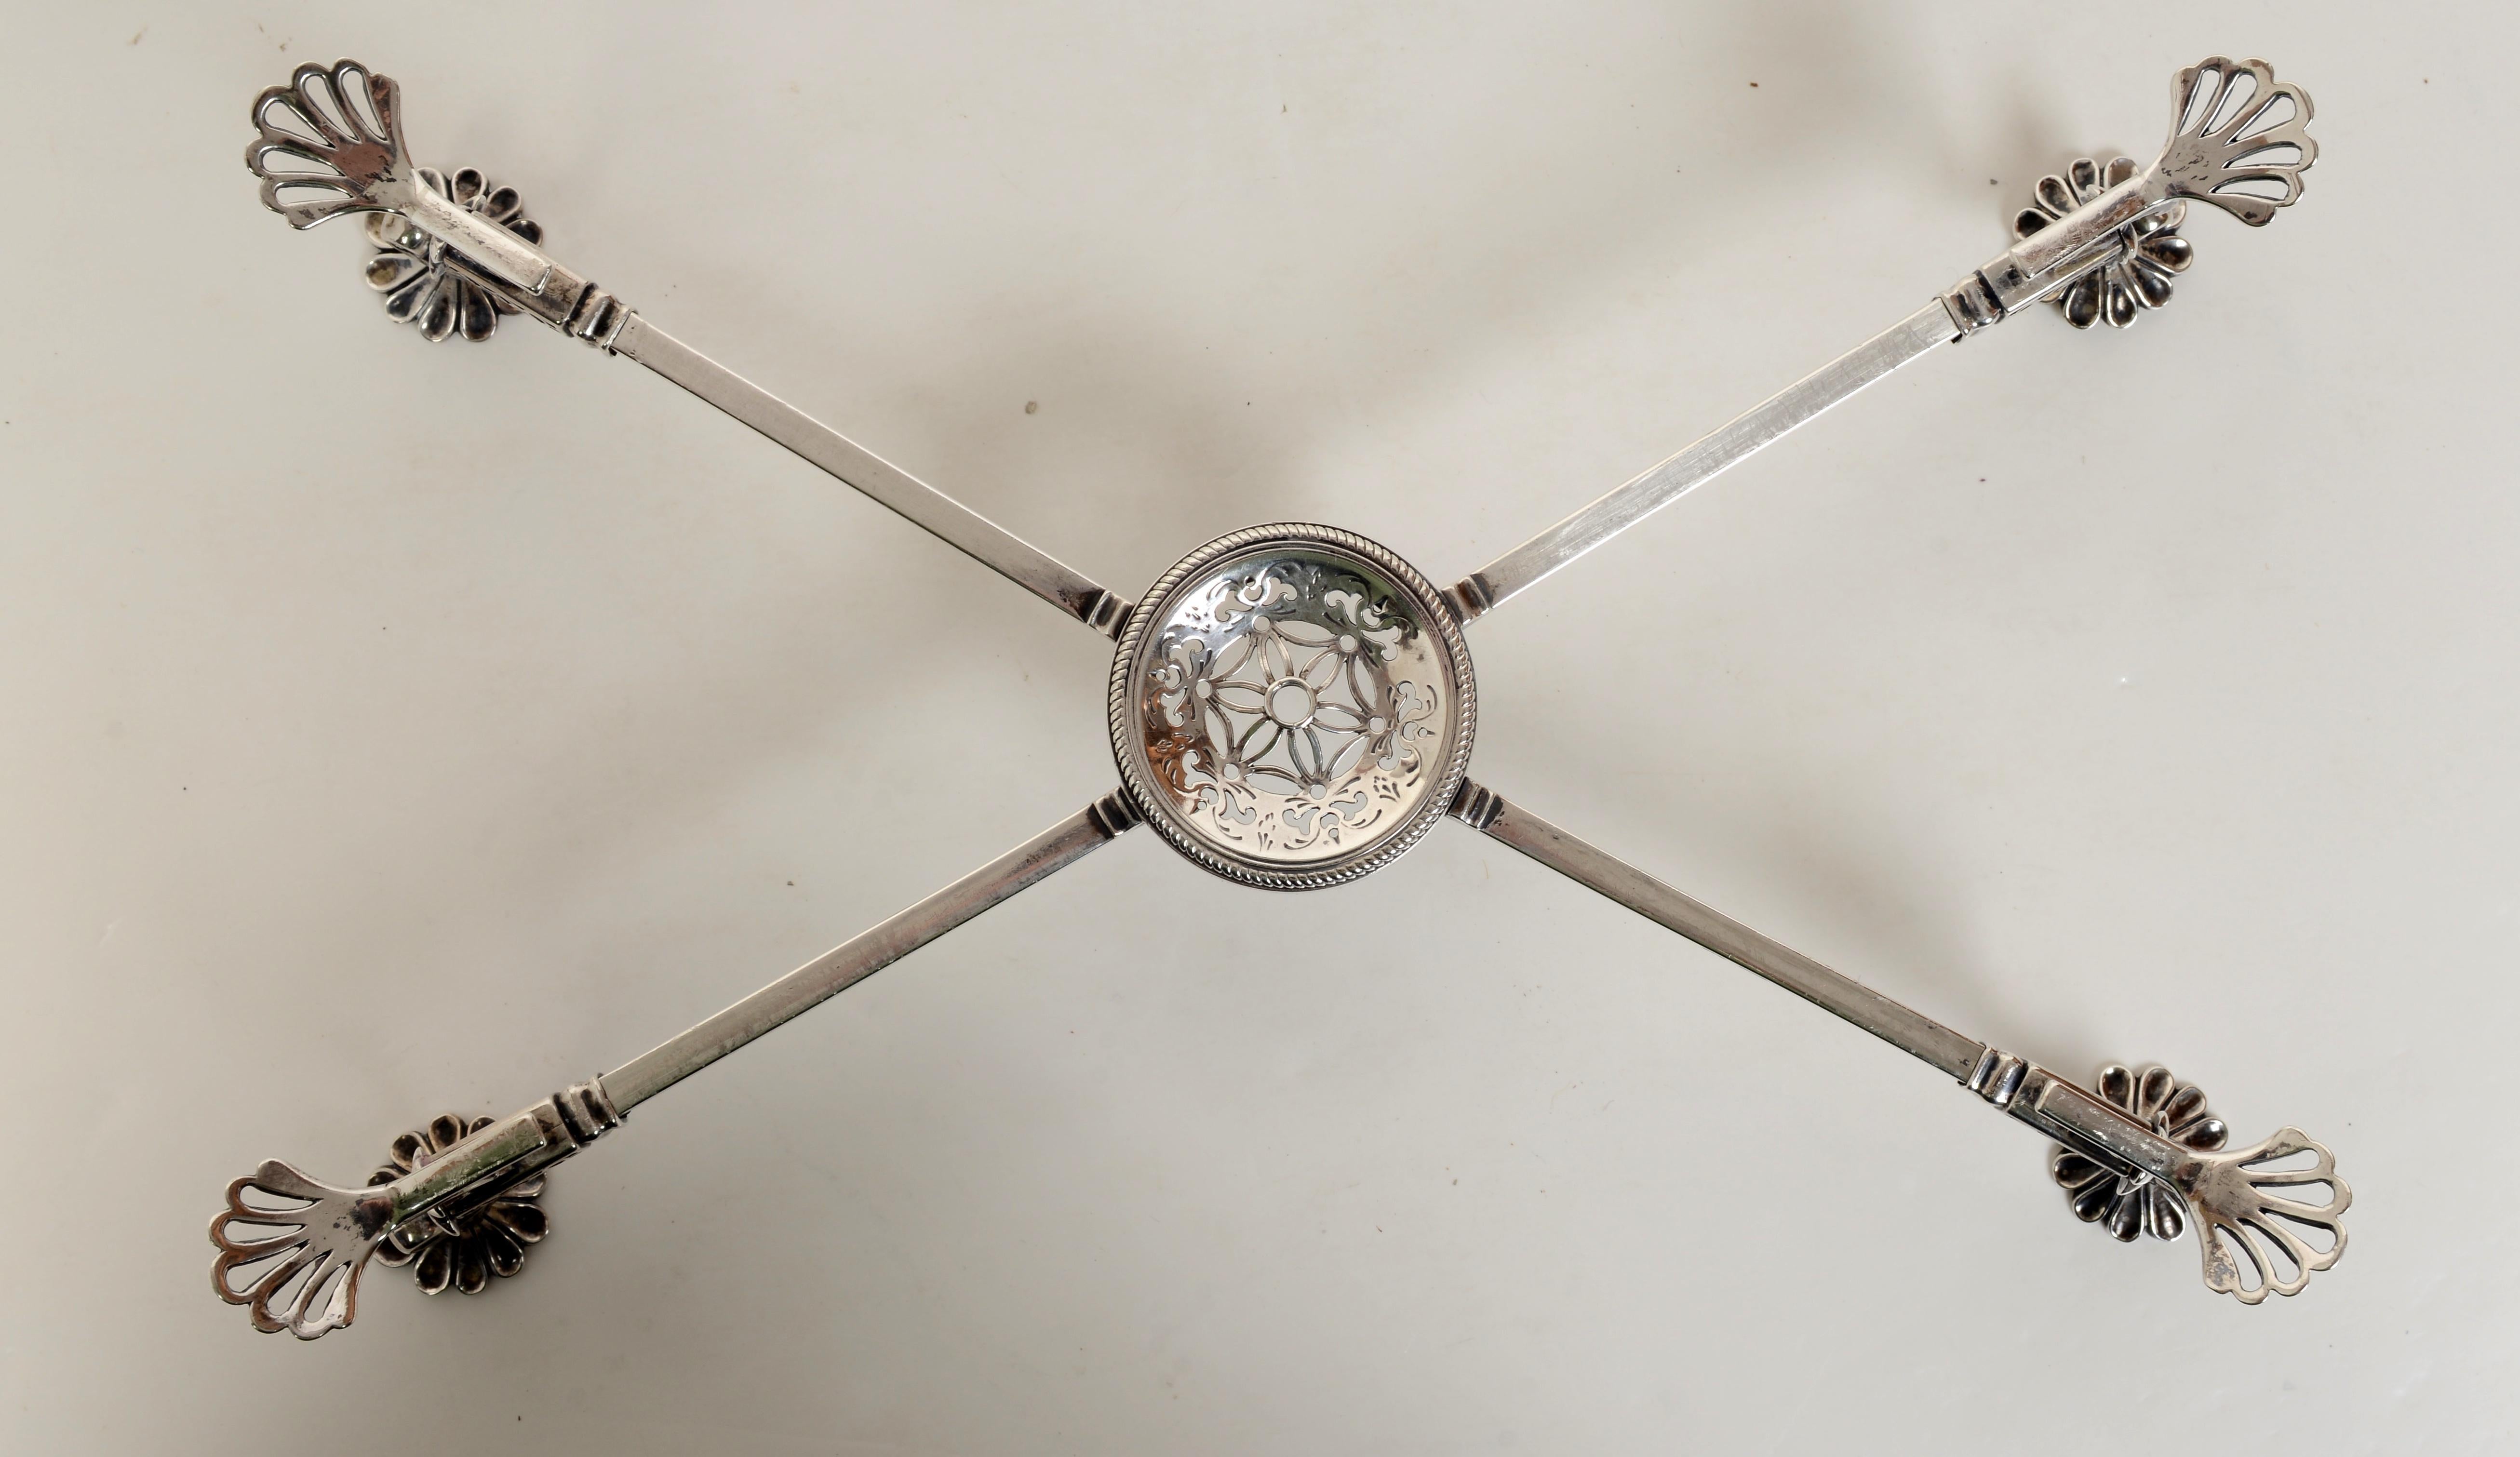 18th c Sterling silver dish Cross by William Plummer c1780. William Plummer was apprenticed to Edward Aldridge, clothworker on 4 February 1746. He was free on 5 February 1755. His first hallmark is entered as a large worker on 8 April 1755. His